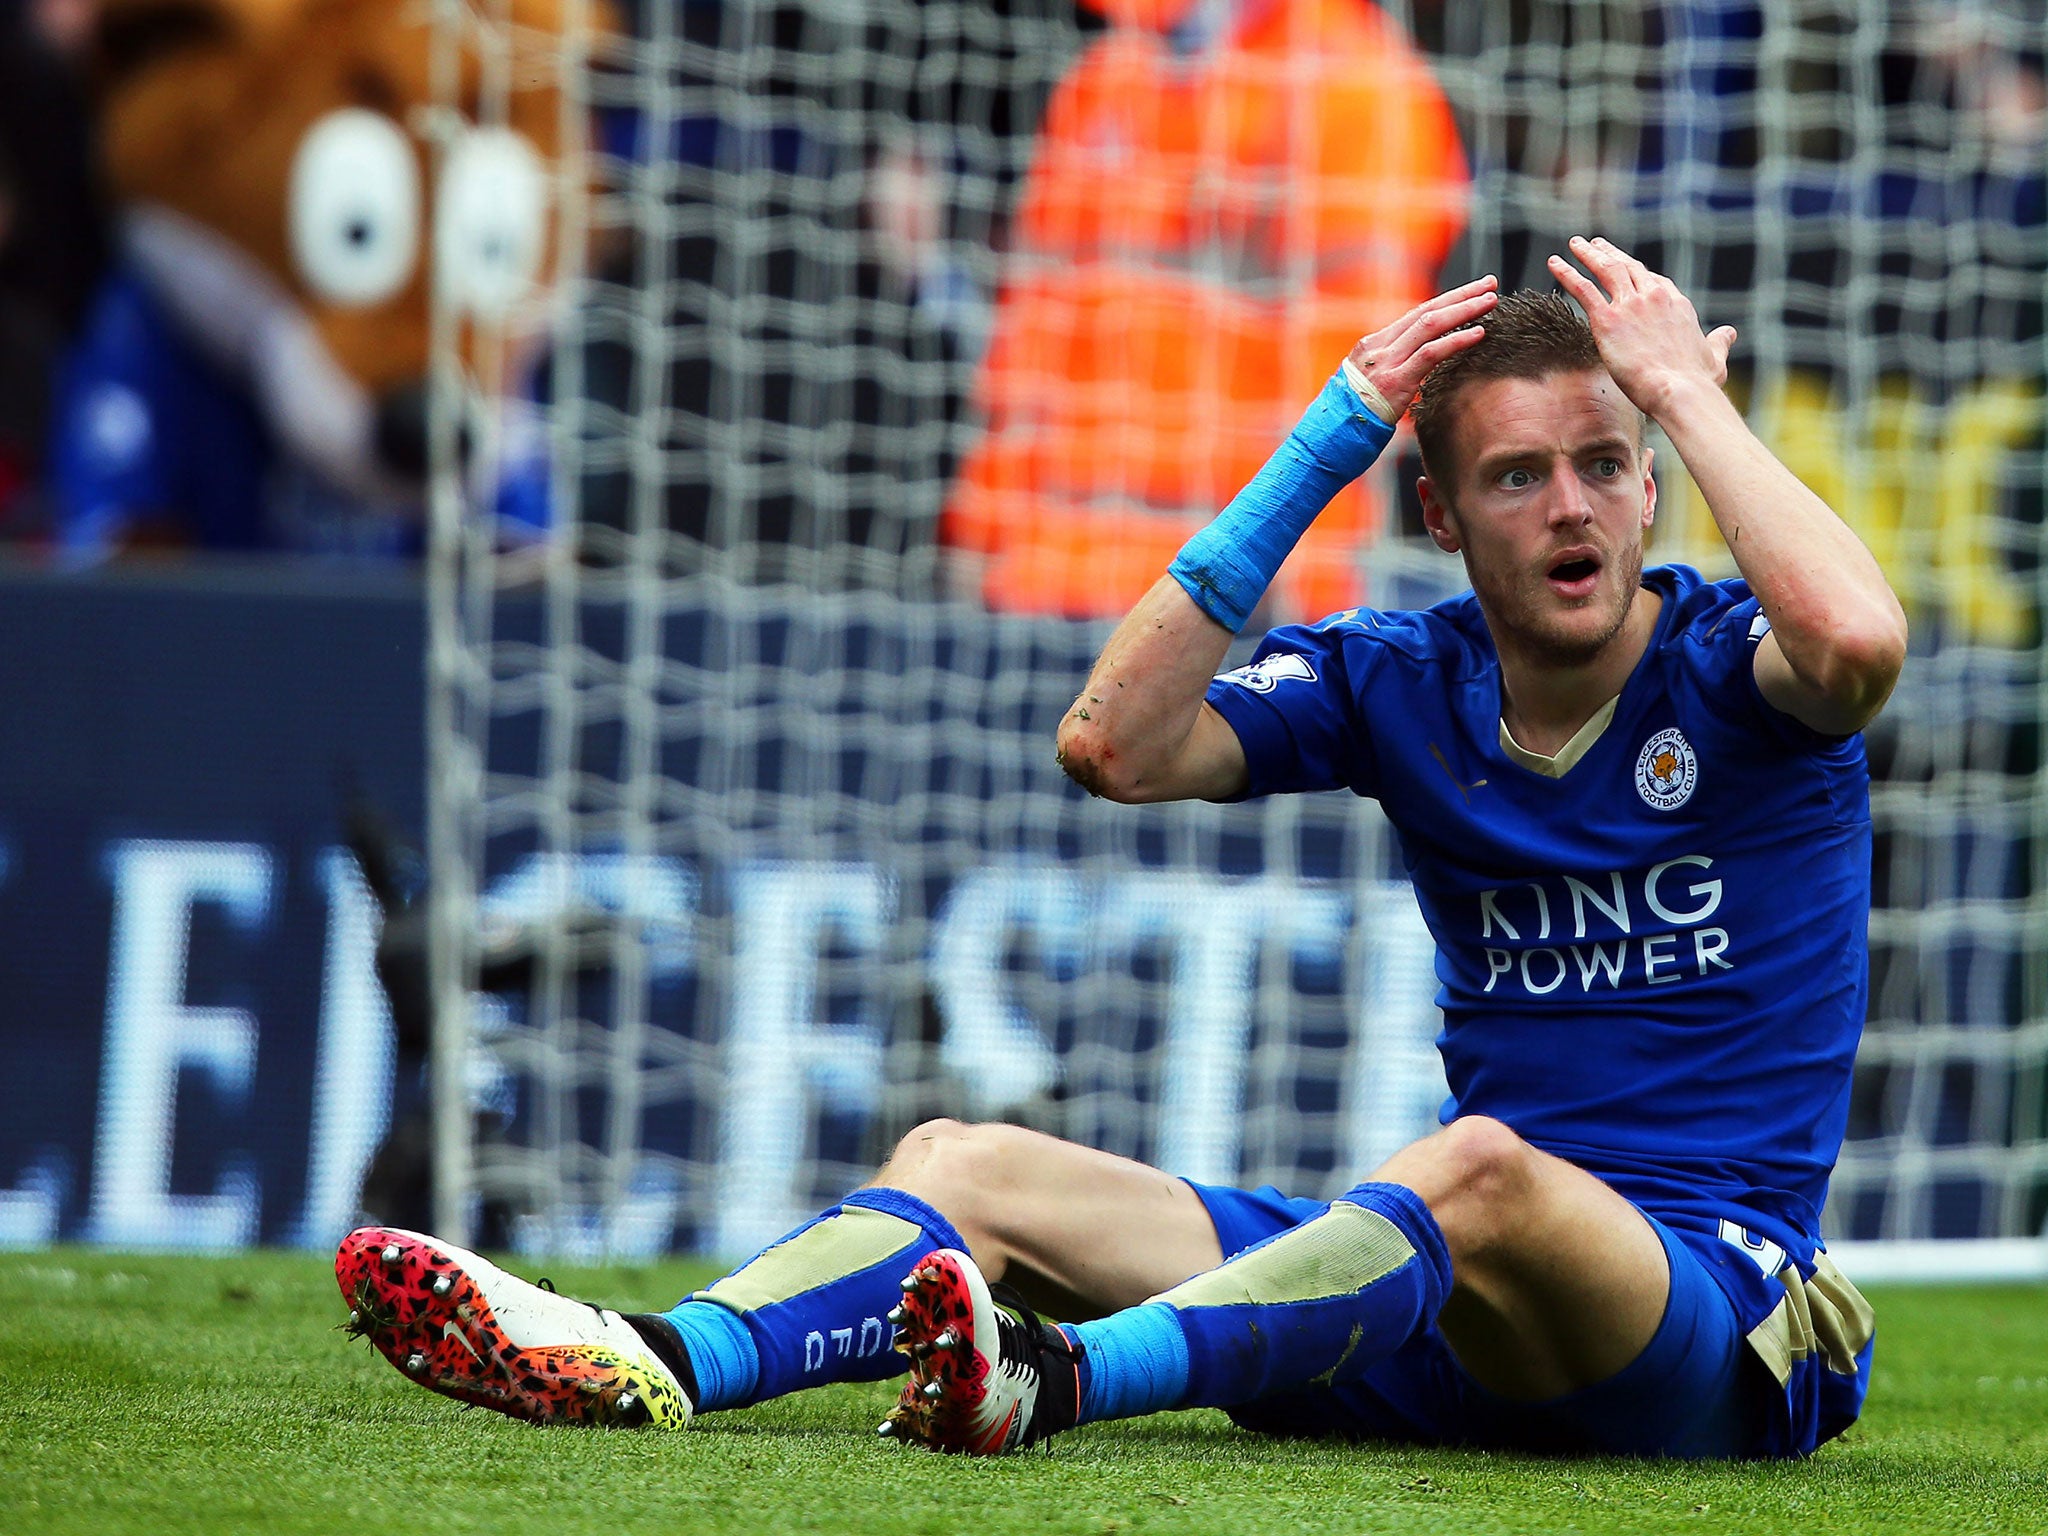 &#13;
Jamie Vardy reacts after being sent off during Leicester vs West Ham &#13;